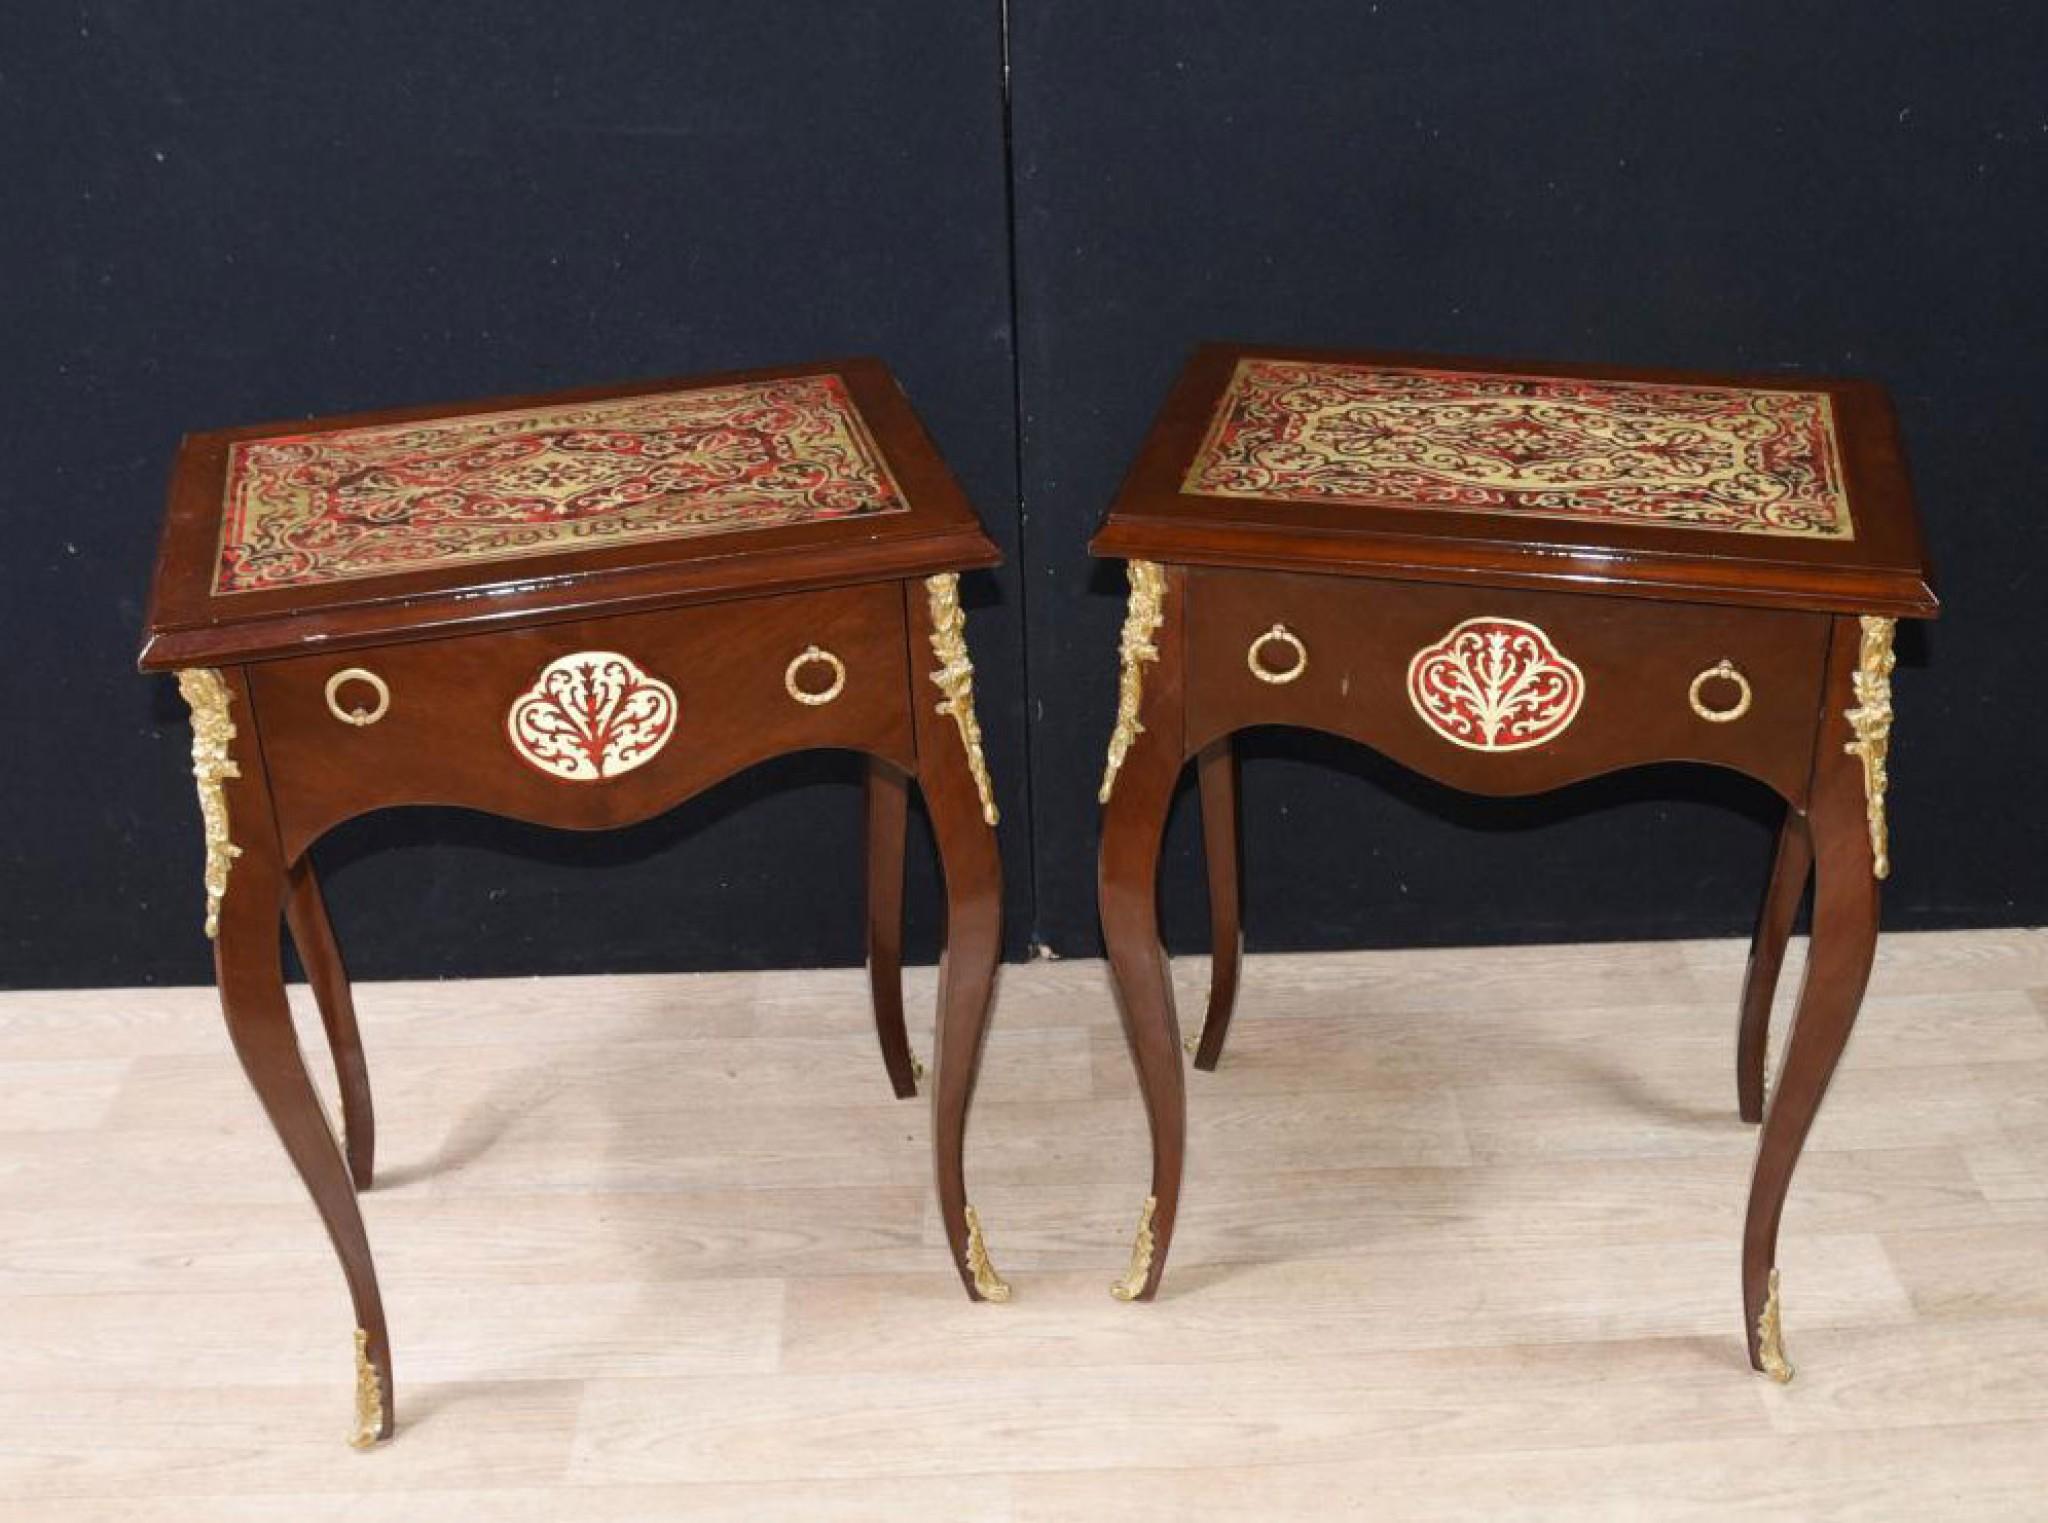 - Come view this in our Canonbury Antiques Hertfordshire showroom - just 25 minutes north of London
- Gorgeous pair of French Boulle style side tables with distinctive red finish
- One drawer to the front on each of these so ample storage on this